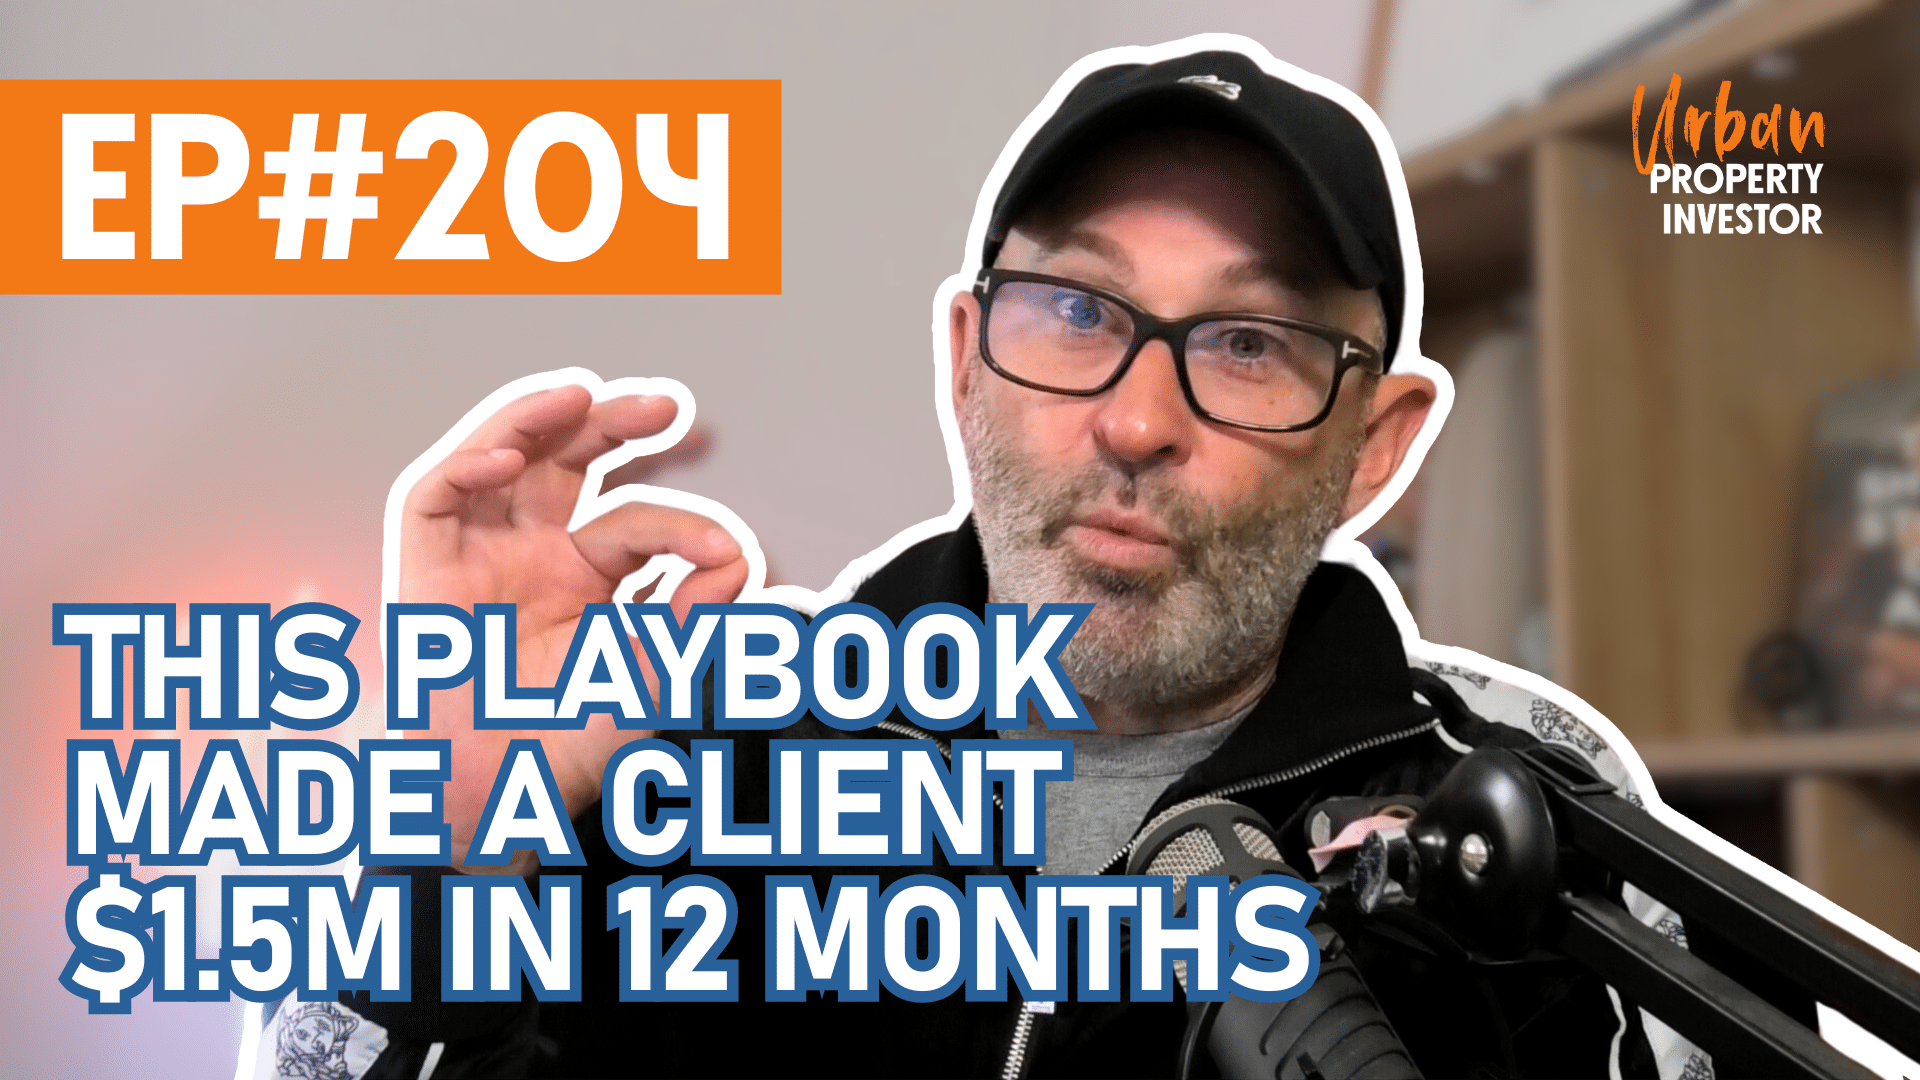 This Playbook Made A Client $1.5M In 12 Months